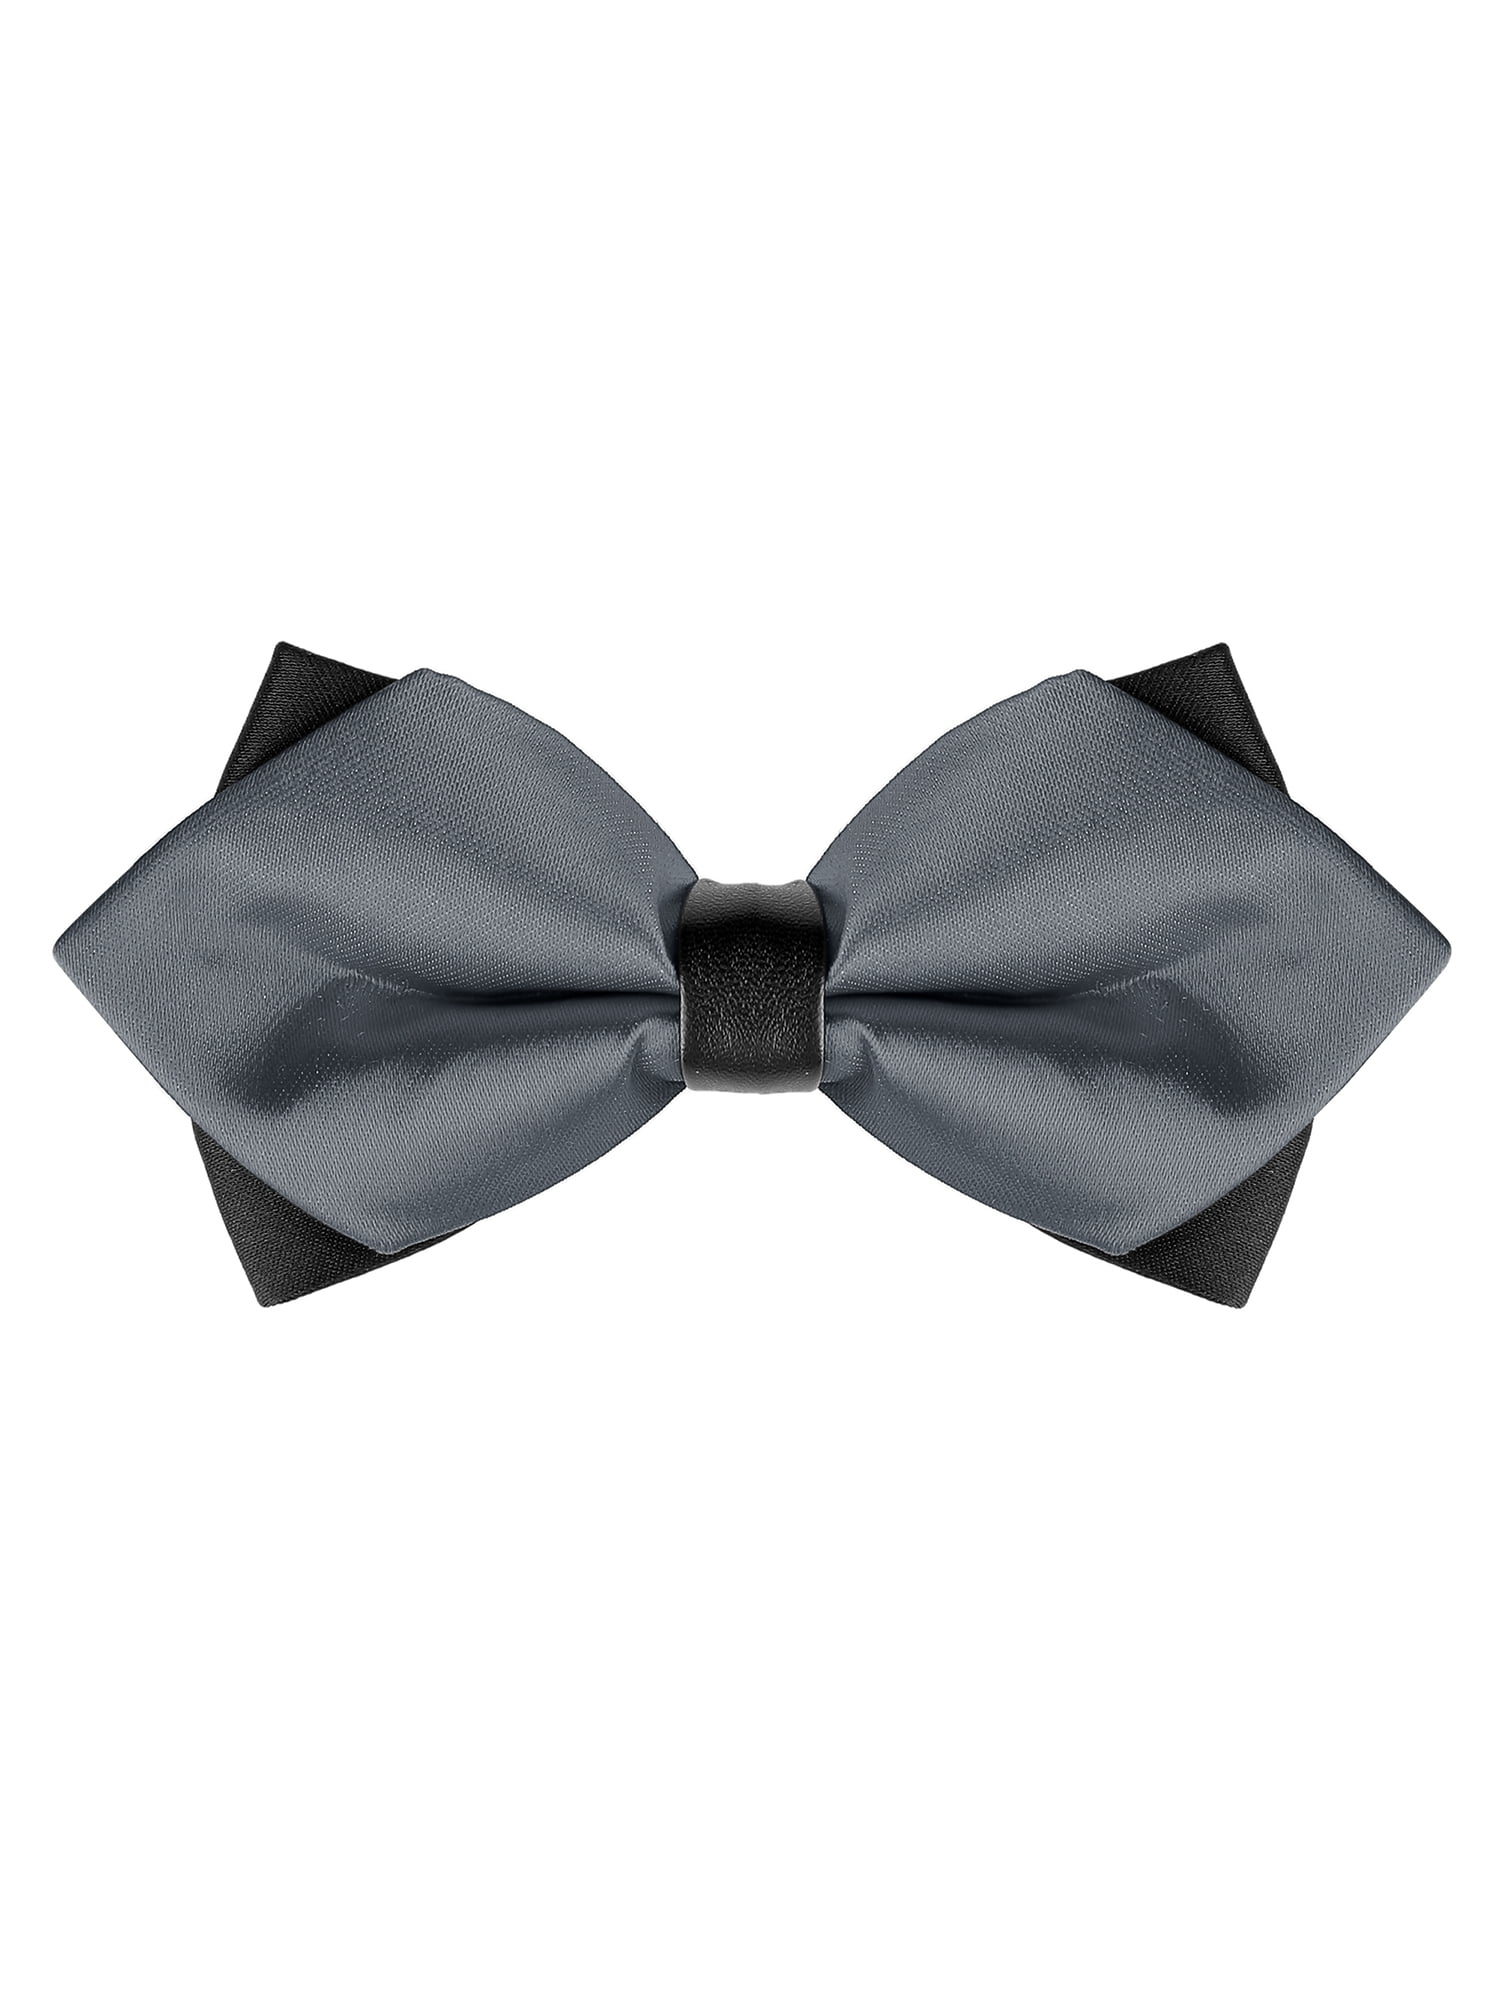 SMART MENS NEW SATIN BOW TIE IN RED WEDDINGS EVENING FORMAL PARTY PROMS 